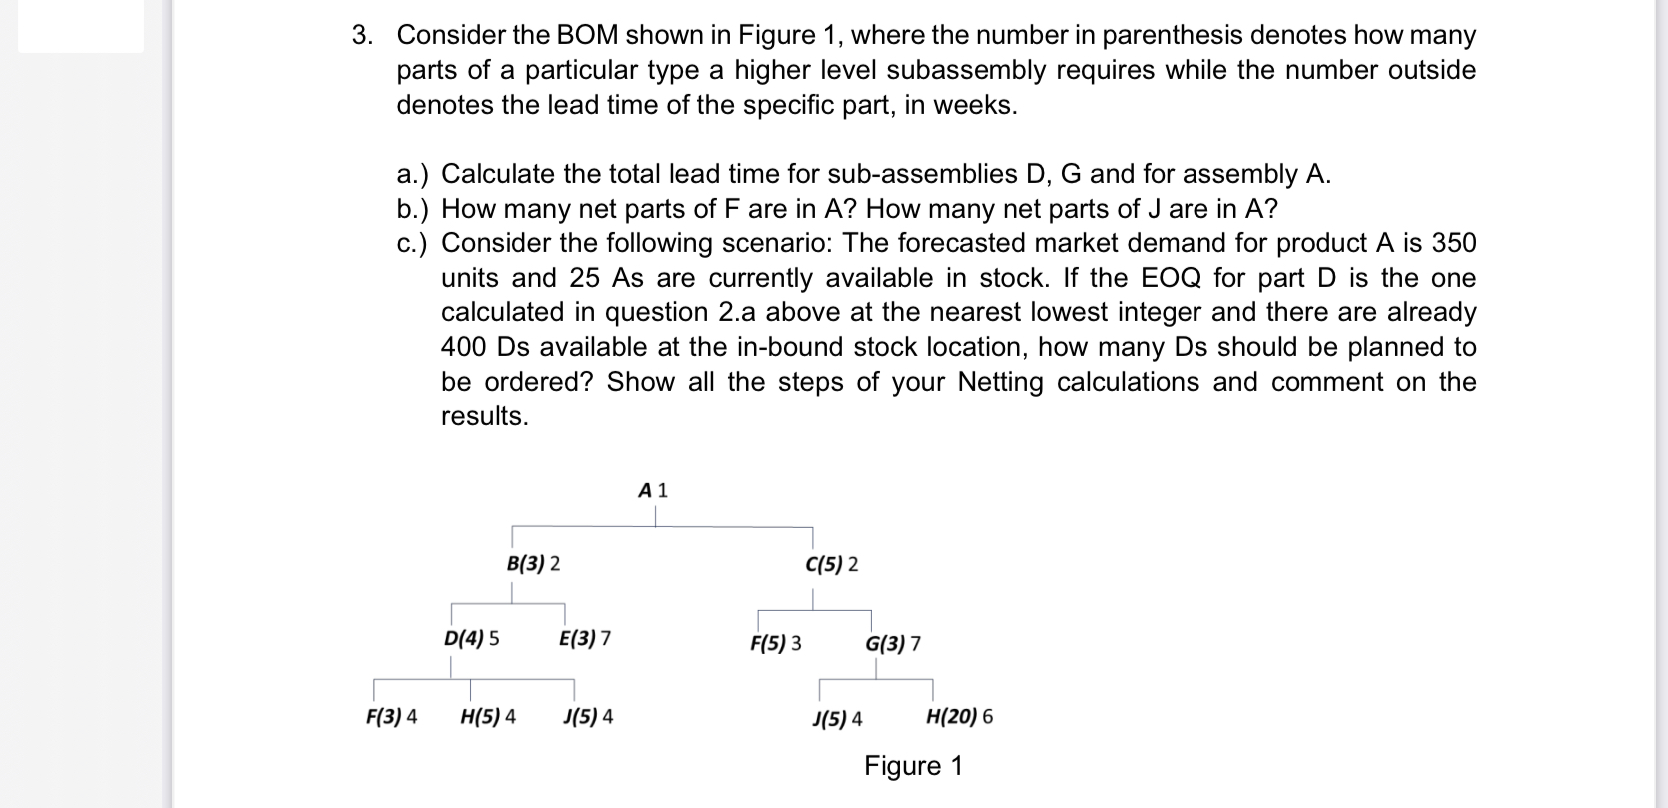 3. Consider the BOM shown in Figure 1, where the number in parenthesis denotes how many parts of a particular